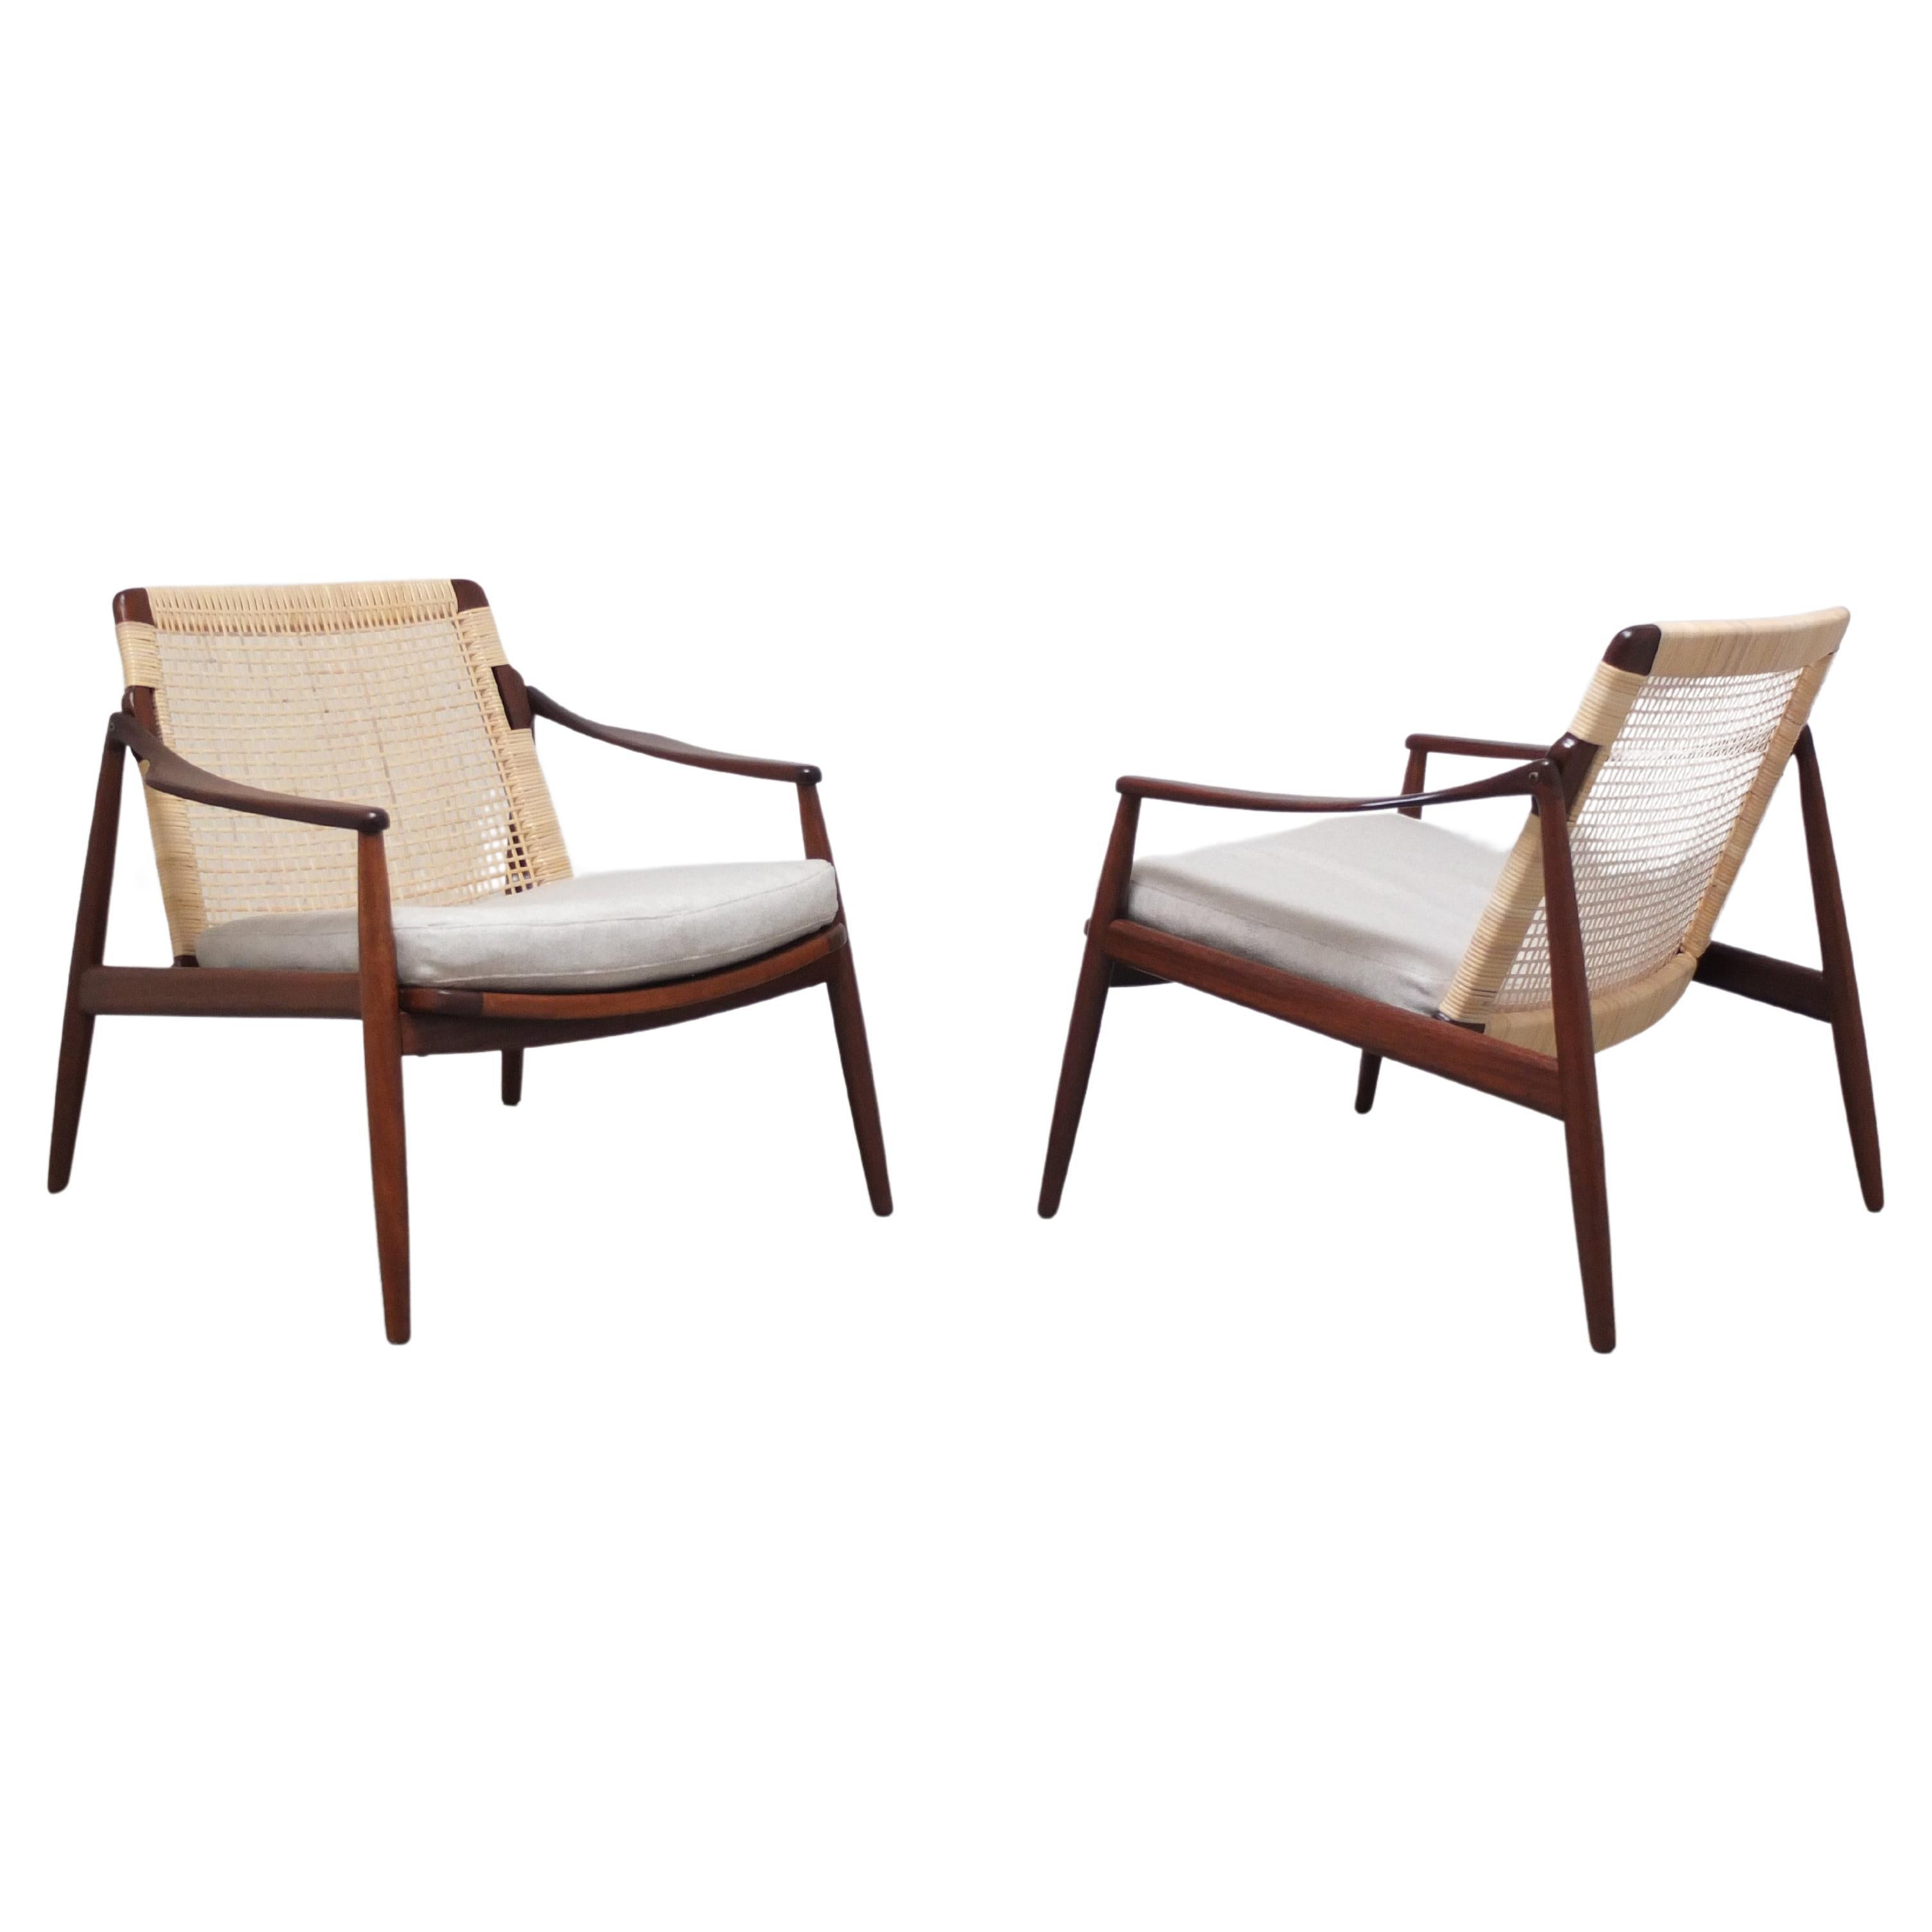 Pair of 'Model 400' Easy Chairs by Hartmut Lohmeyer for Wilkhahn, 1956 For Sale